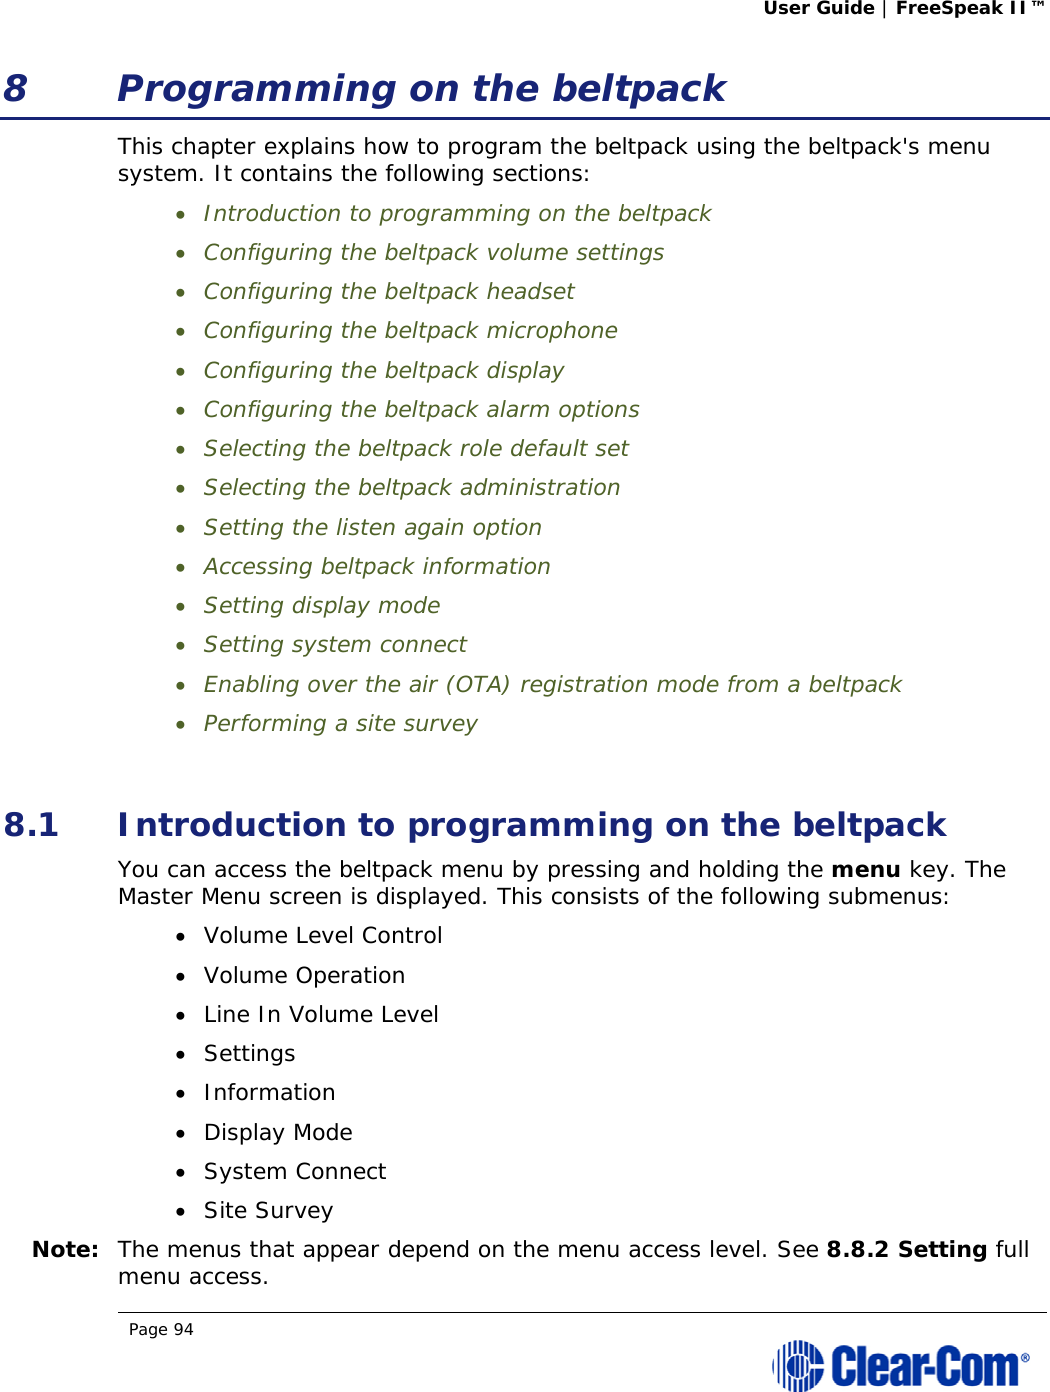 User Guide | FreeSpeak II™  Page 94  8 Programming on the beltpack This chapter explains how to program the beltpack using the beltpack&apos;s menu system. It contains the following sections:  Introduction to programming on the beltpack  Configuring the beltpack volume settings   Configuring the beltpack headset  Configuring the beltpack microphone  Configuring the beltpack display  Configuring the beltpack alarm options  Selecting the beltpack role default set  Selecting the beltpack administration  Setting the listen again option   Accessing beltpack information  Setting display mode  Setting system connect  Enabling over the air (OTA) registration mode from a beltpack  Performing a site survey  8.1 Introduction to programming on the beltpack You can access the beltpack menu by pressing and holding the menu key. The Master Menu screen is displayed. This consists of the following submenus:  Volume Level Control  Volume Operation  Line In Volume Level  Settings  Information  Display Mode  System Connect  Site Survey Note: The menus that appear depend on the menu access level. See 8.8.2 Setting full menu access. 